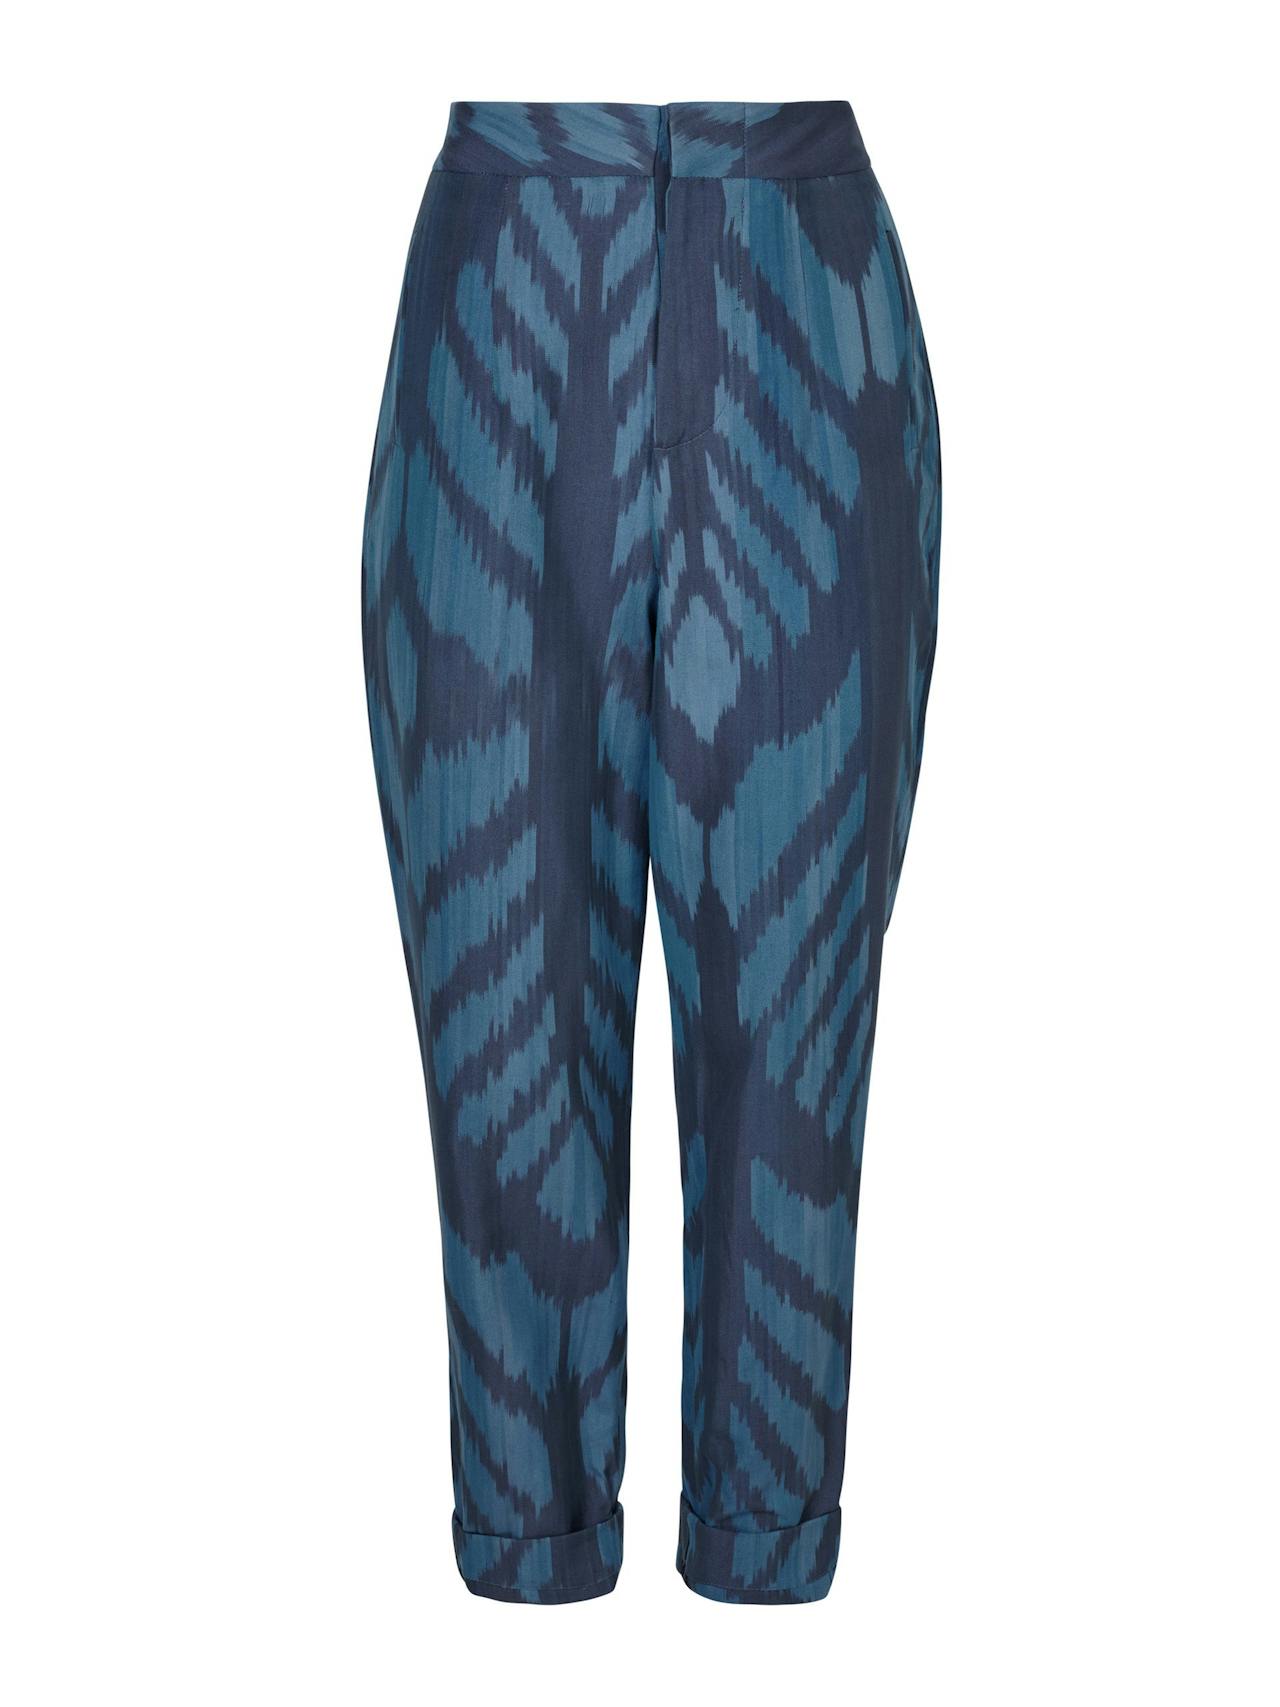 Blue cotton mulberry silk Ikat trousers